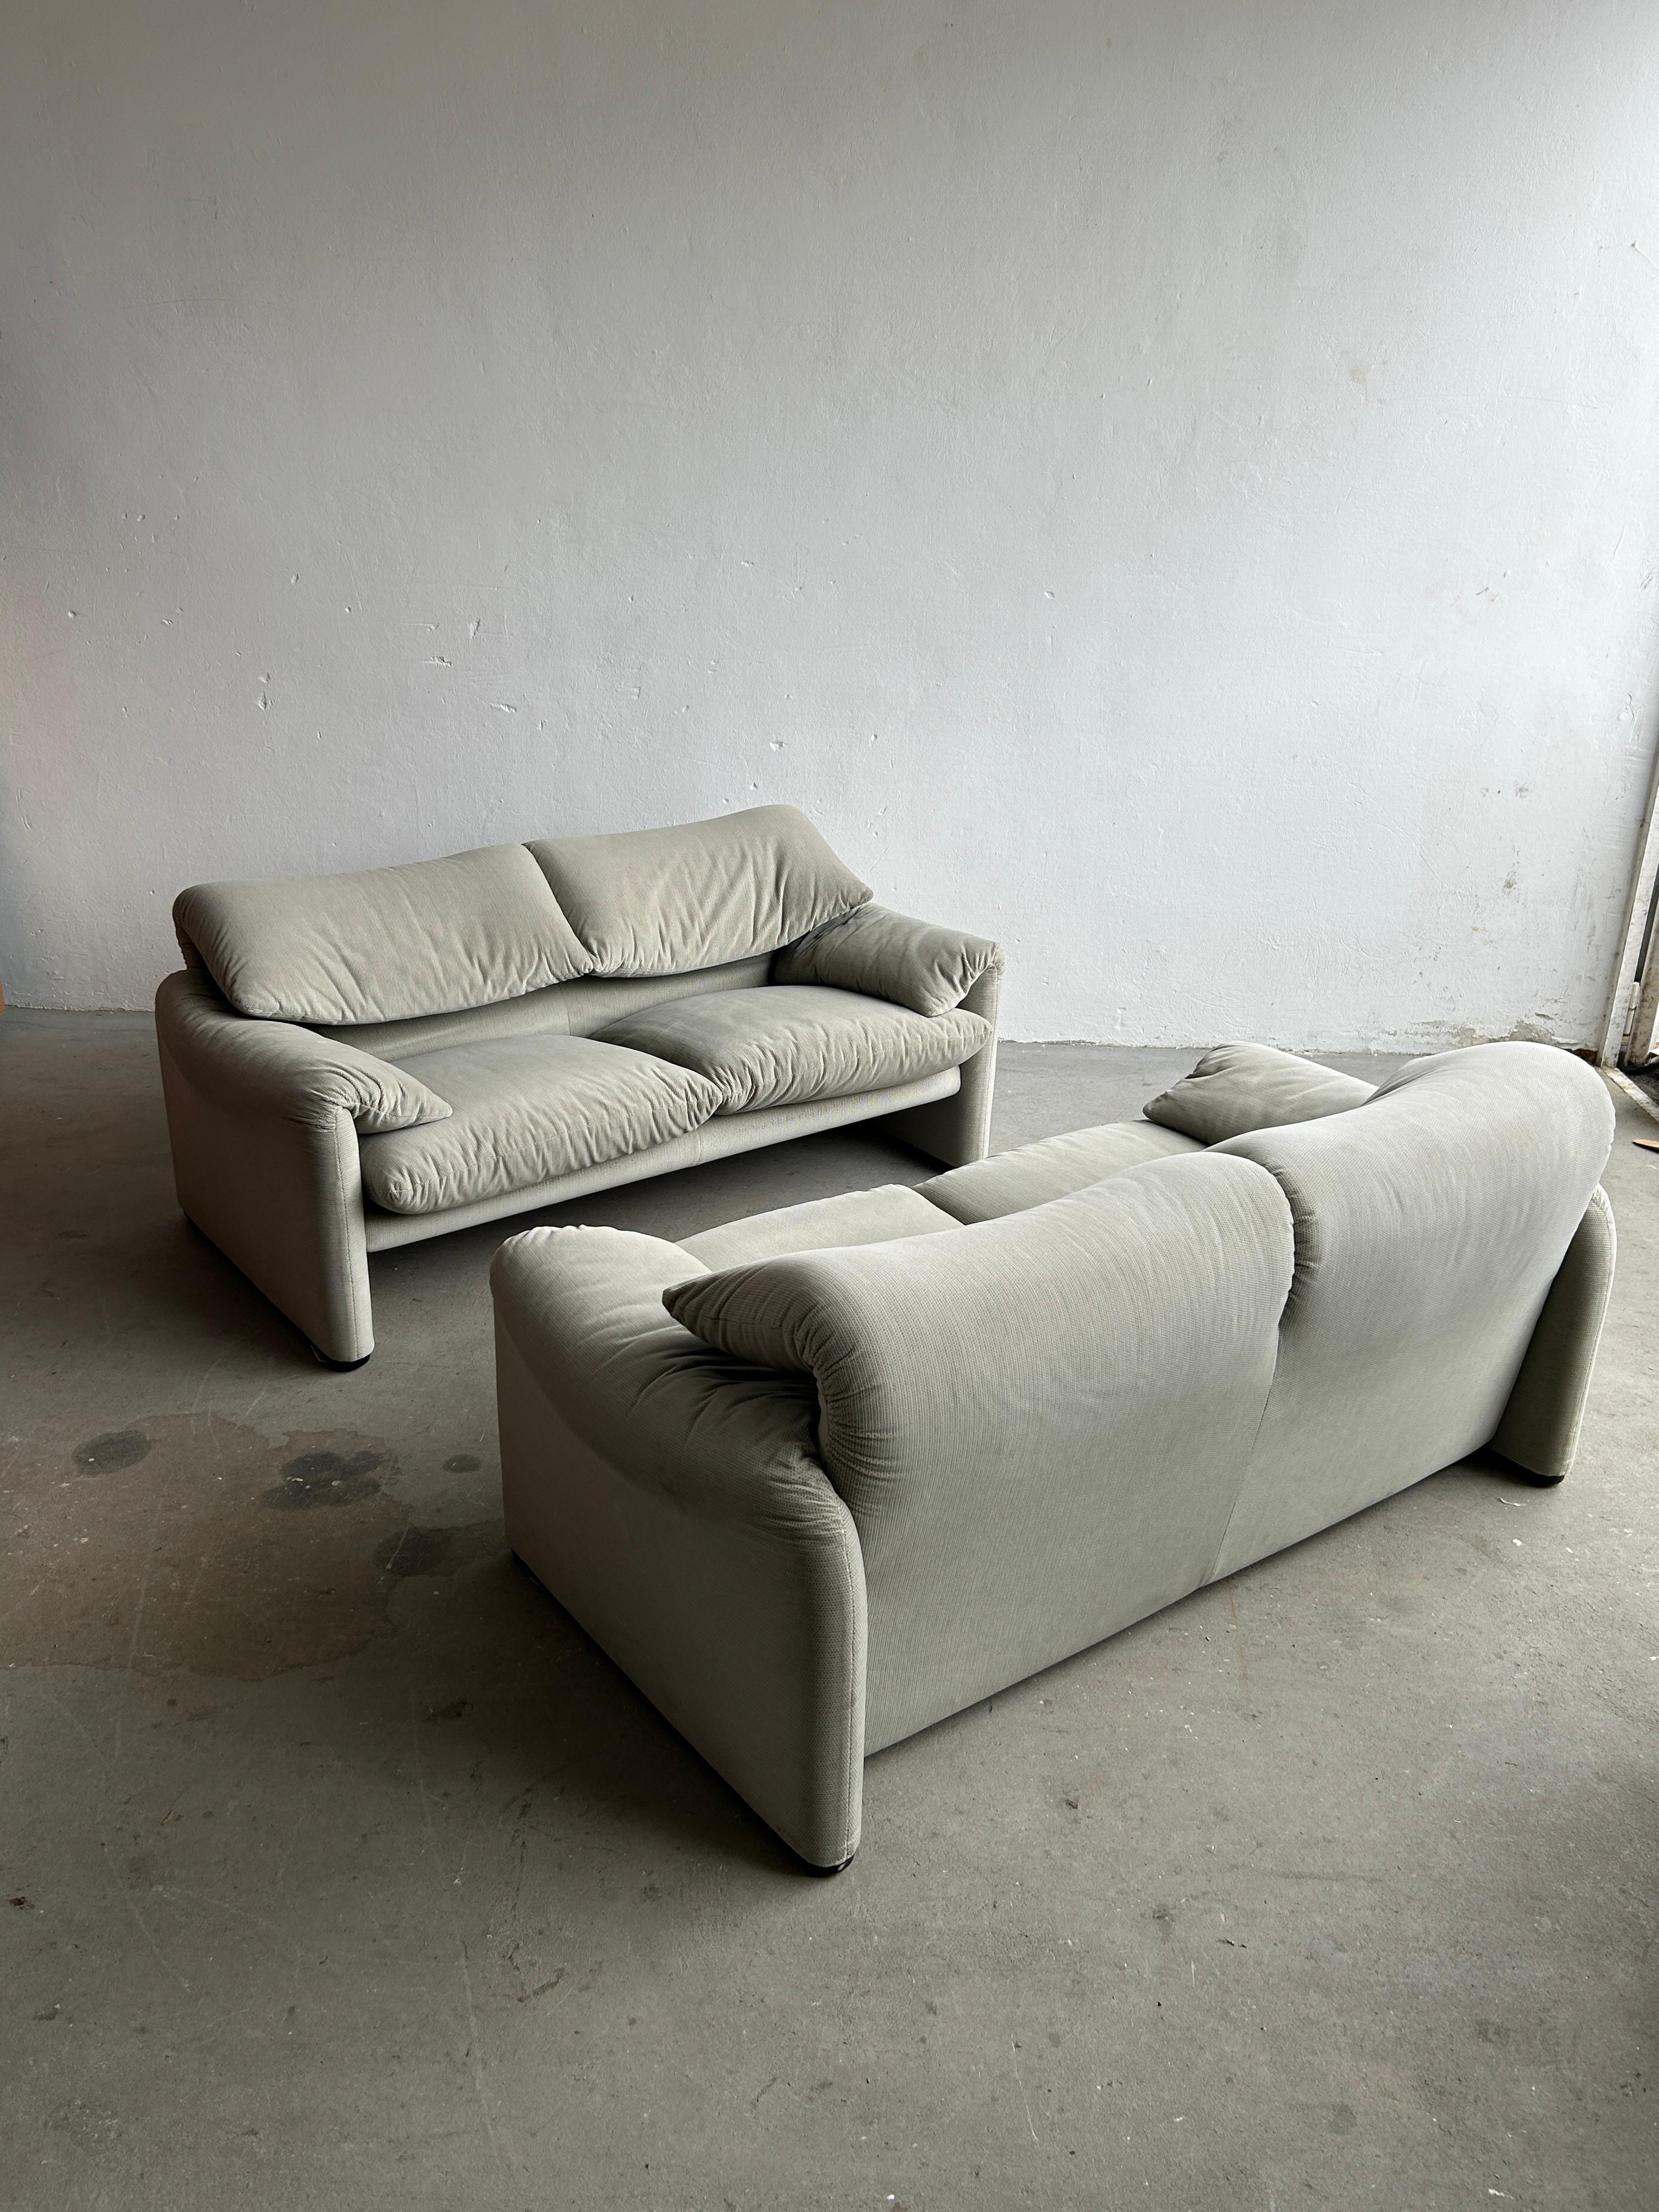 Late 20th Century Pair of Vintage 'Maralunga' Two-Seater Sofas, Vico Magistretti for Cassina, 1970